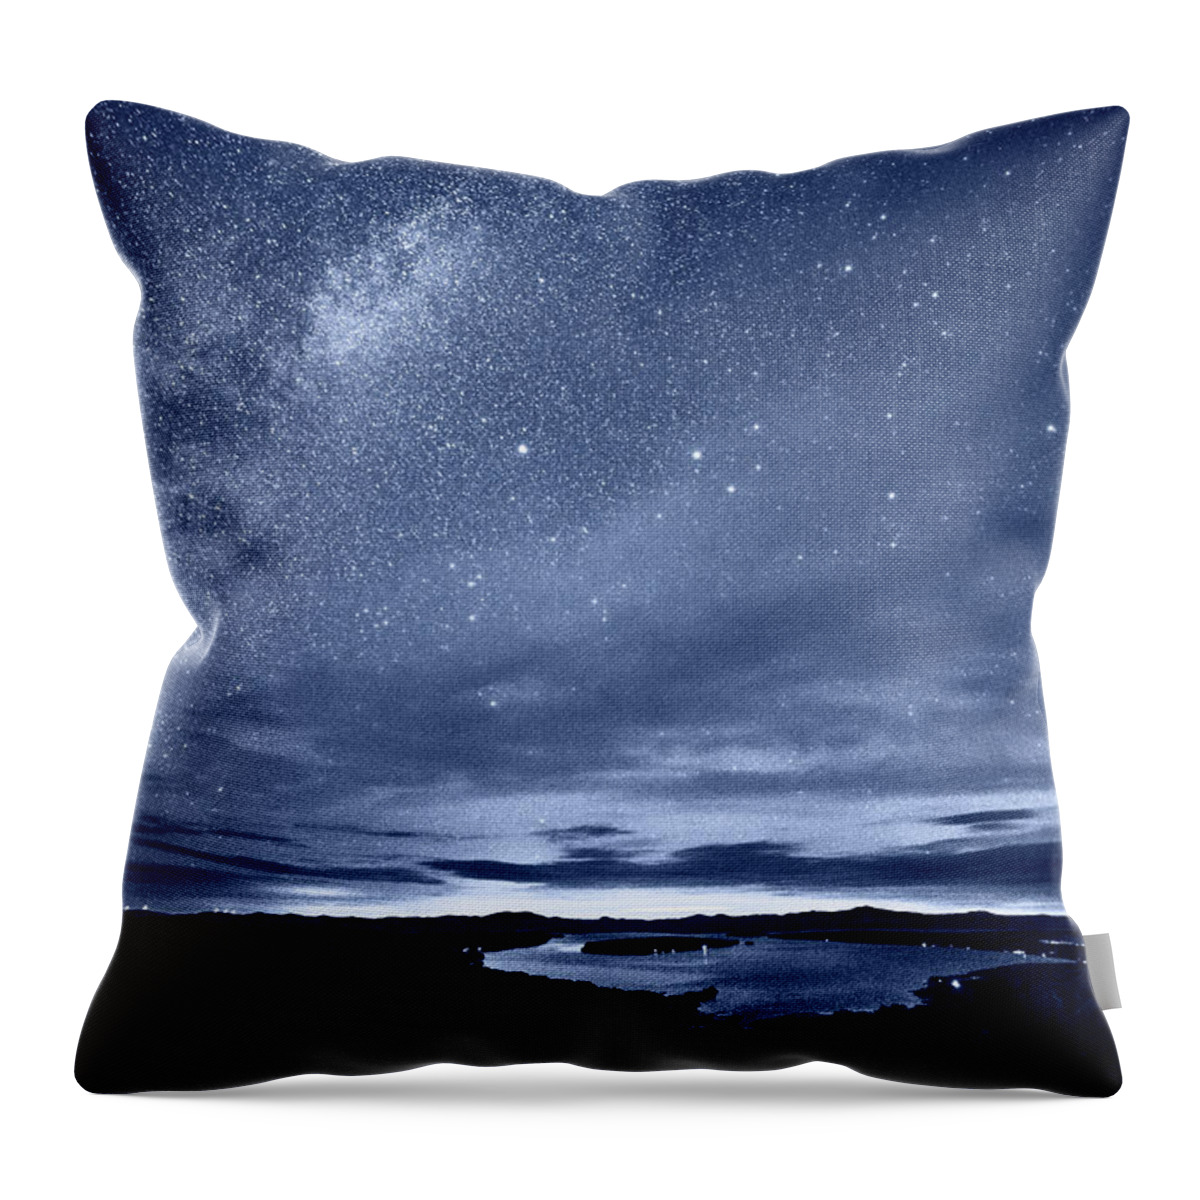 Rangeley Throw Pillow featuring the photograph The Milky Way over Rangeley Lake Rangeley Maine Monochrome Blue Nights by Toby McGuire